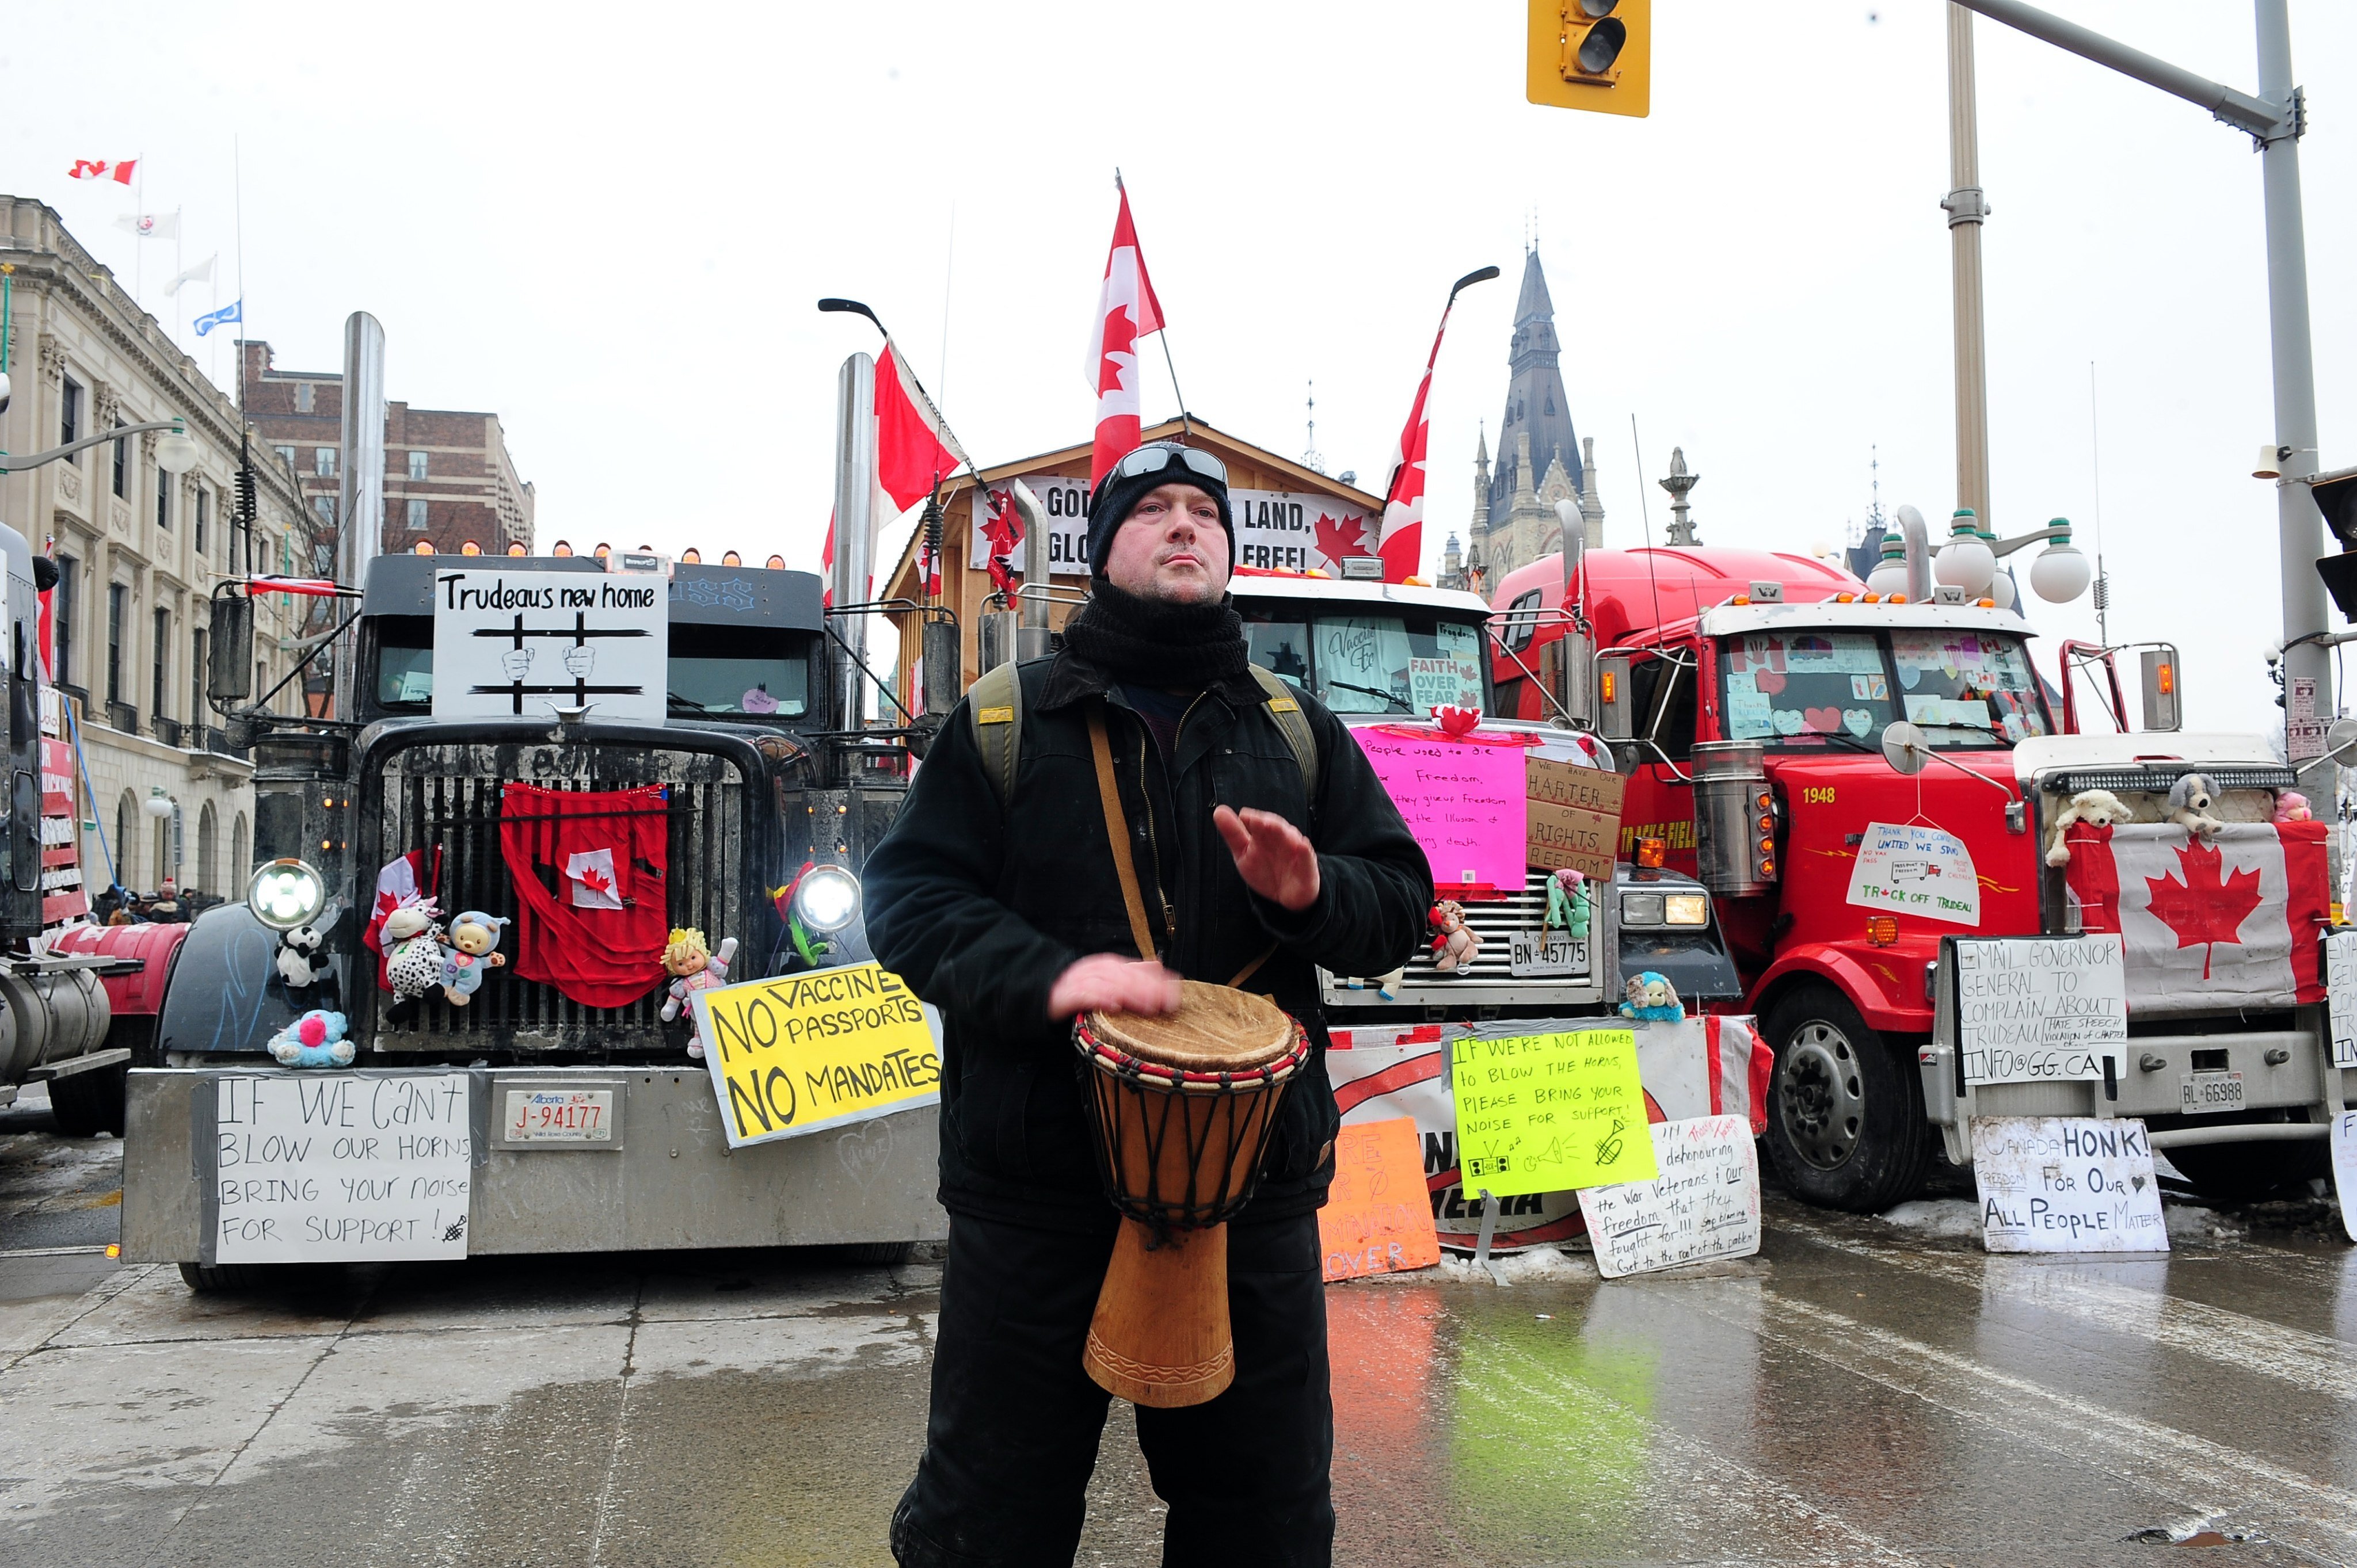 A protester beats a drum as truckers continue to protest in downtown Ottawa, Ontario, Canada. Photo: EPA